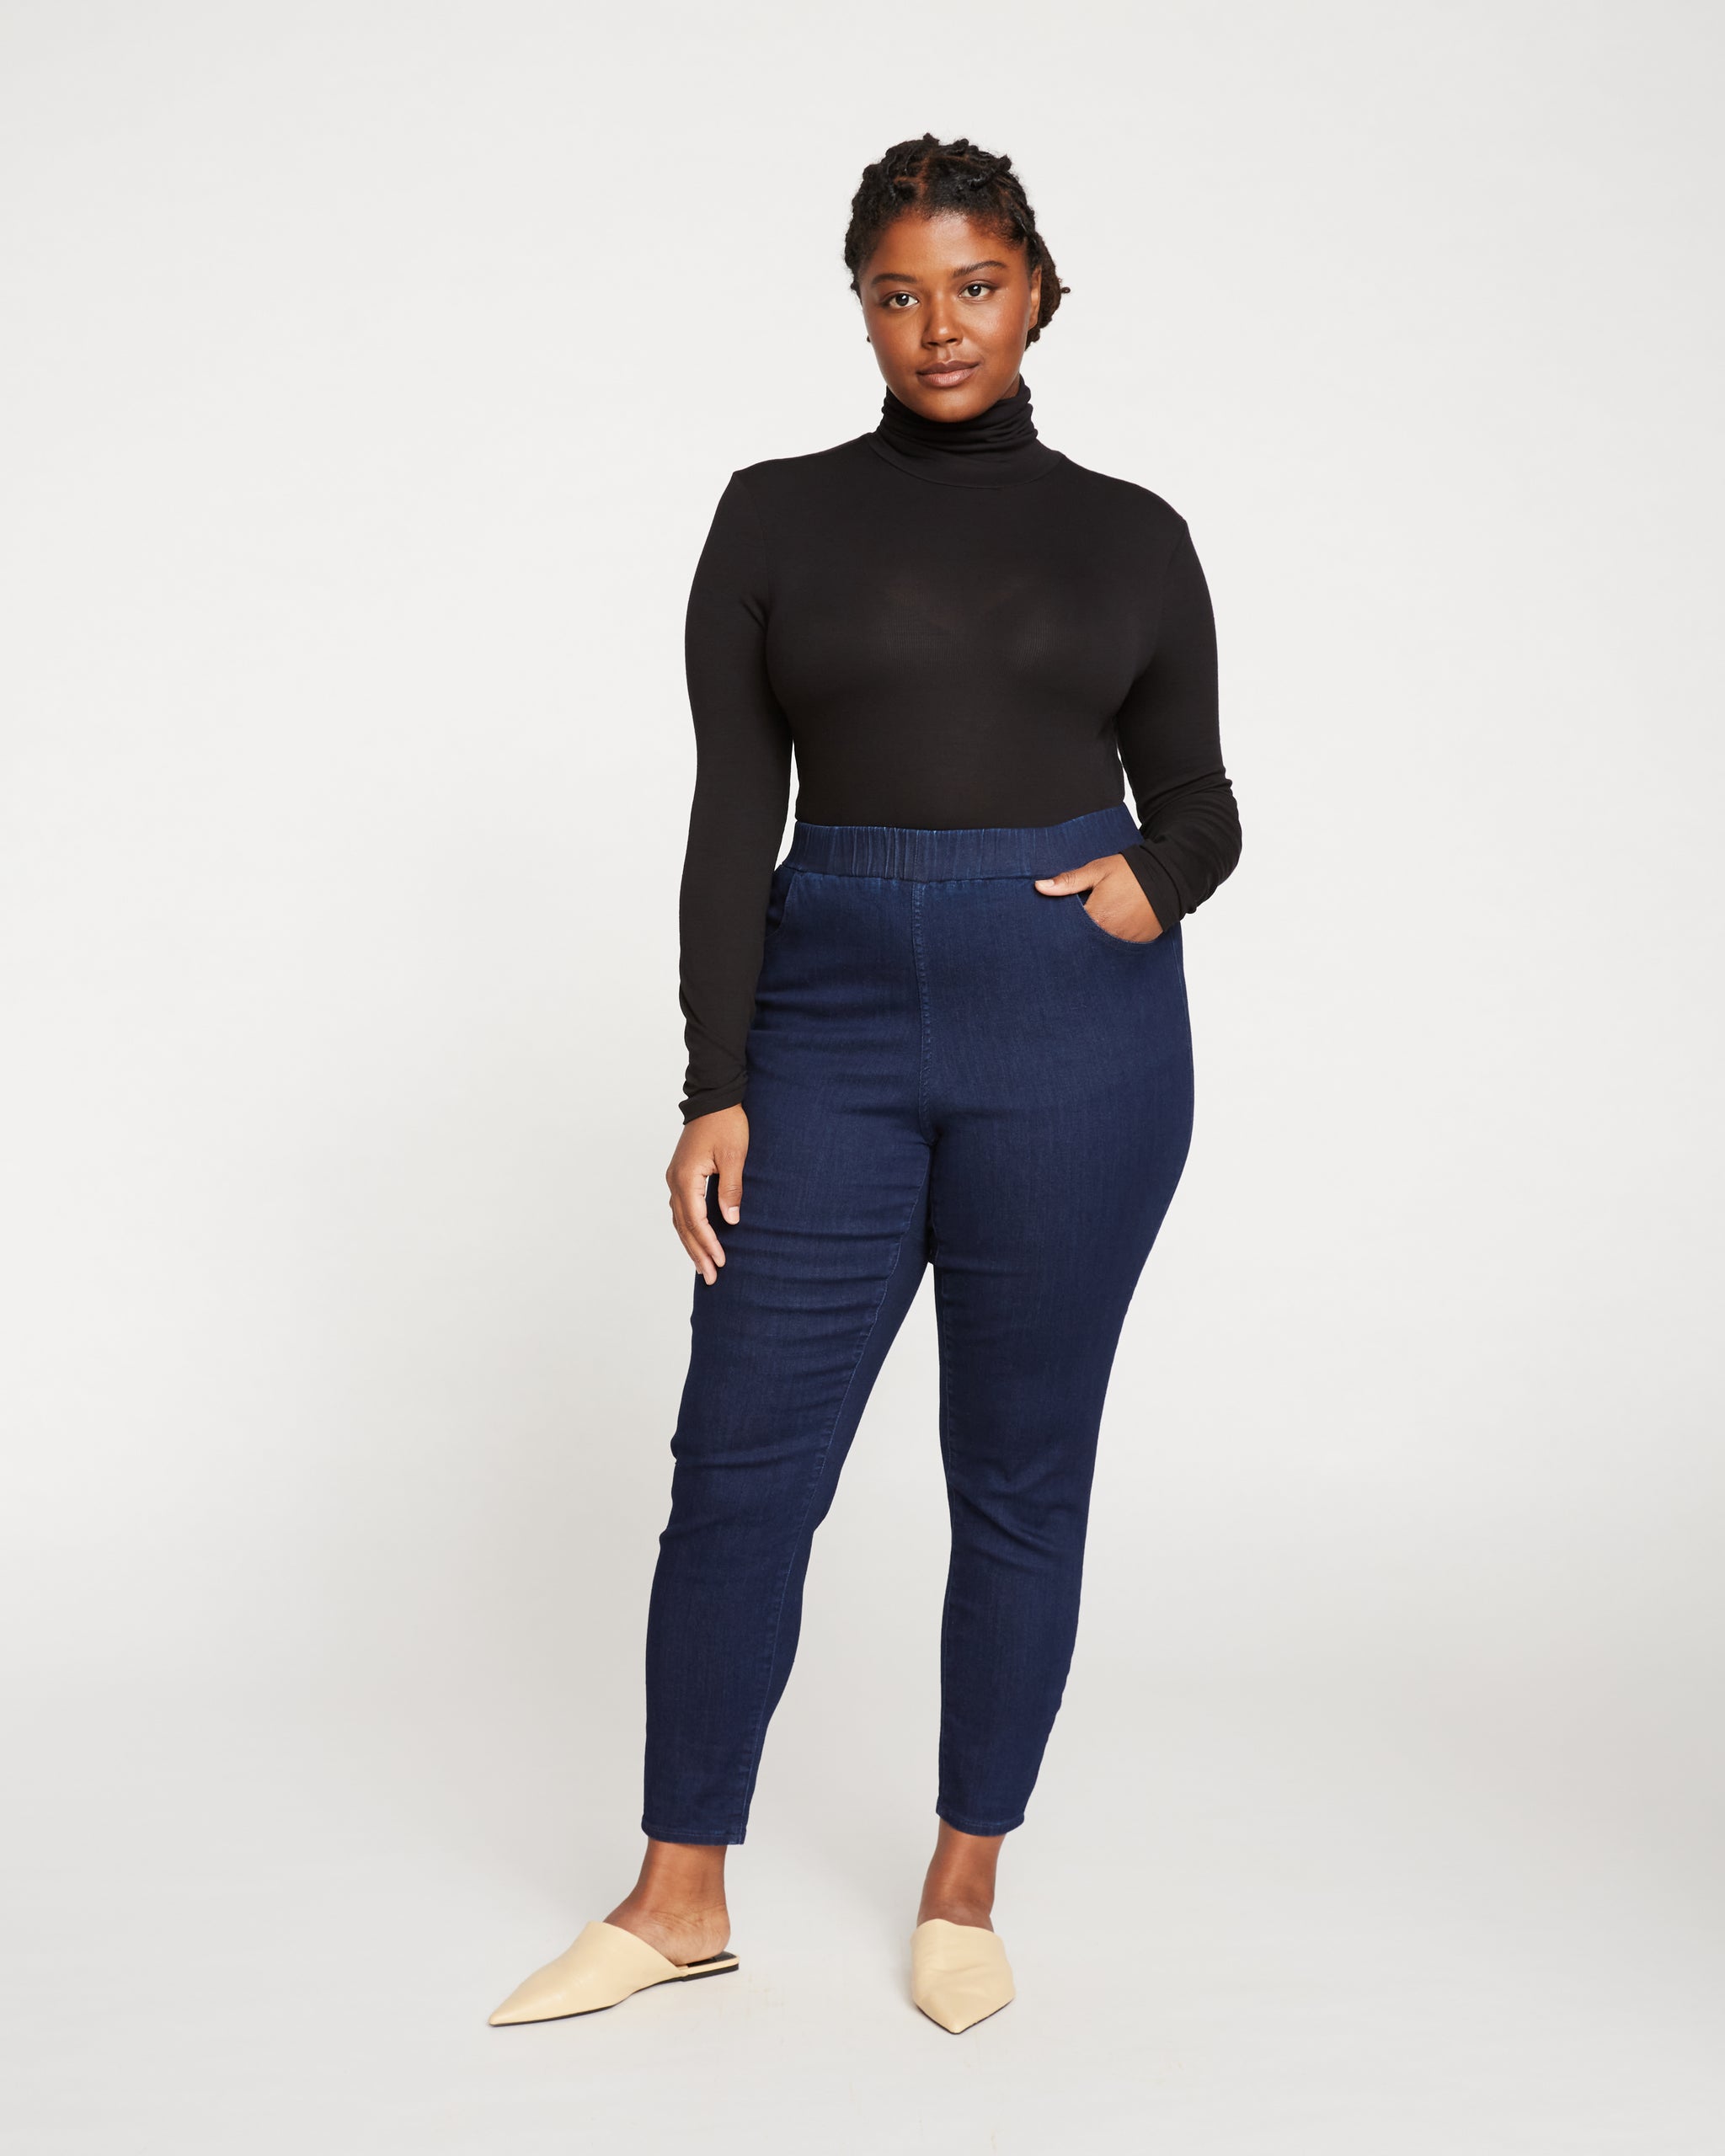 Women Jeans Standard and Plus Full Lengths Jeggings with Pockets